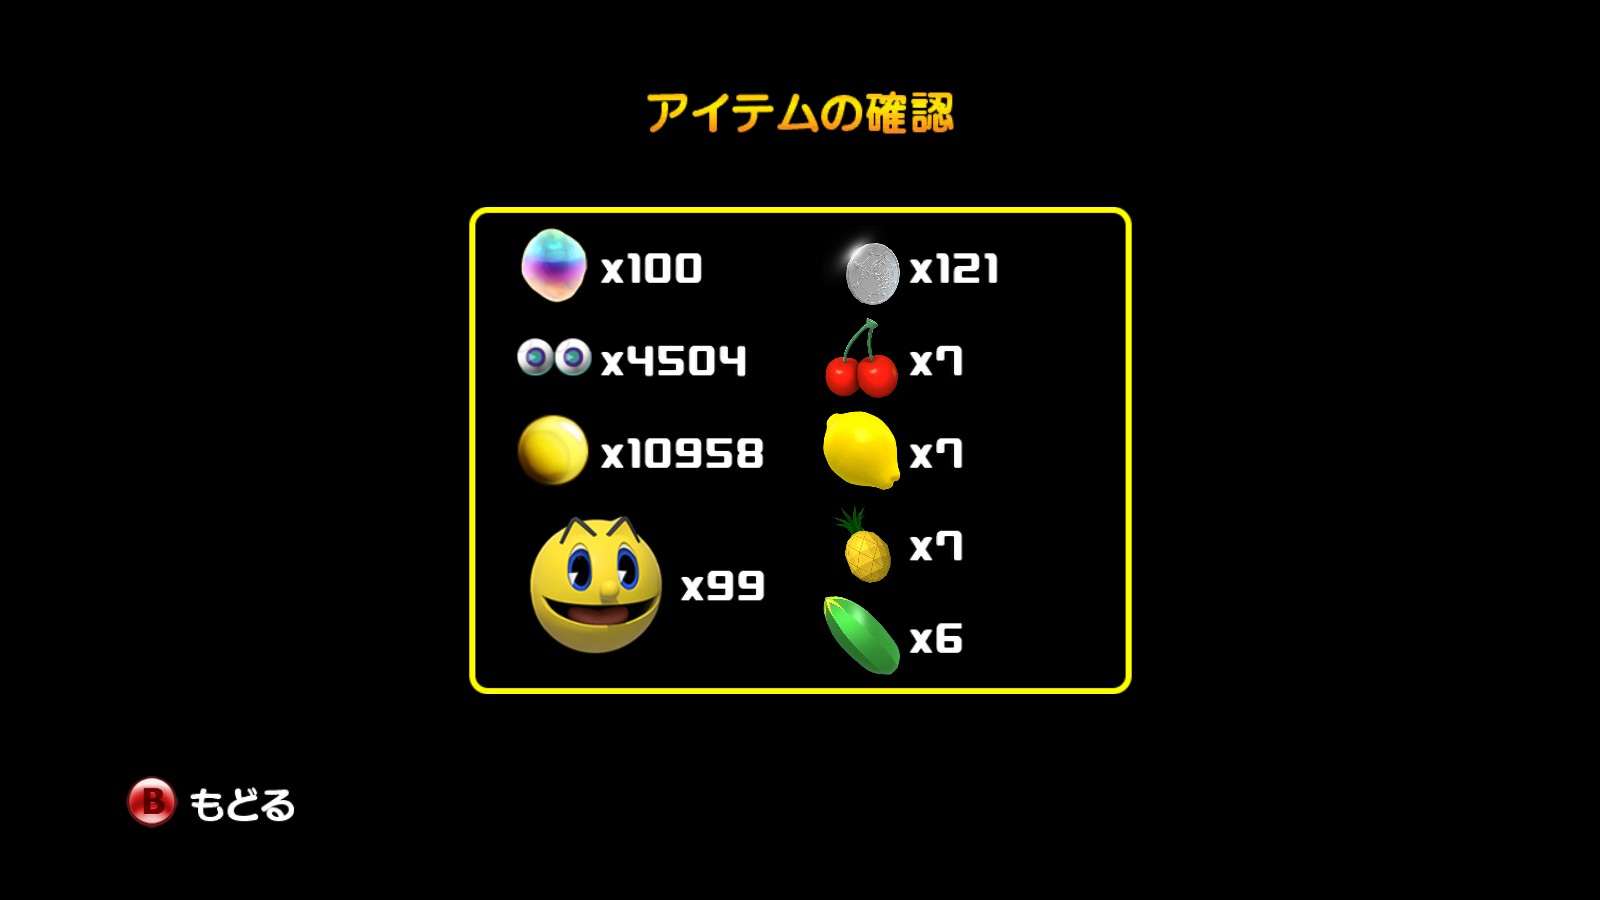 pac man ghostly adventures levels